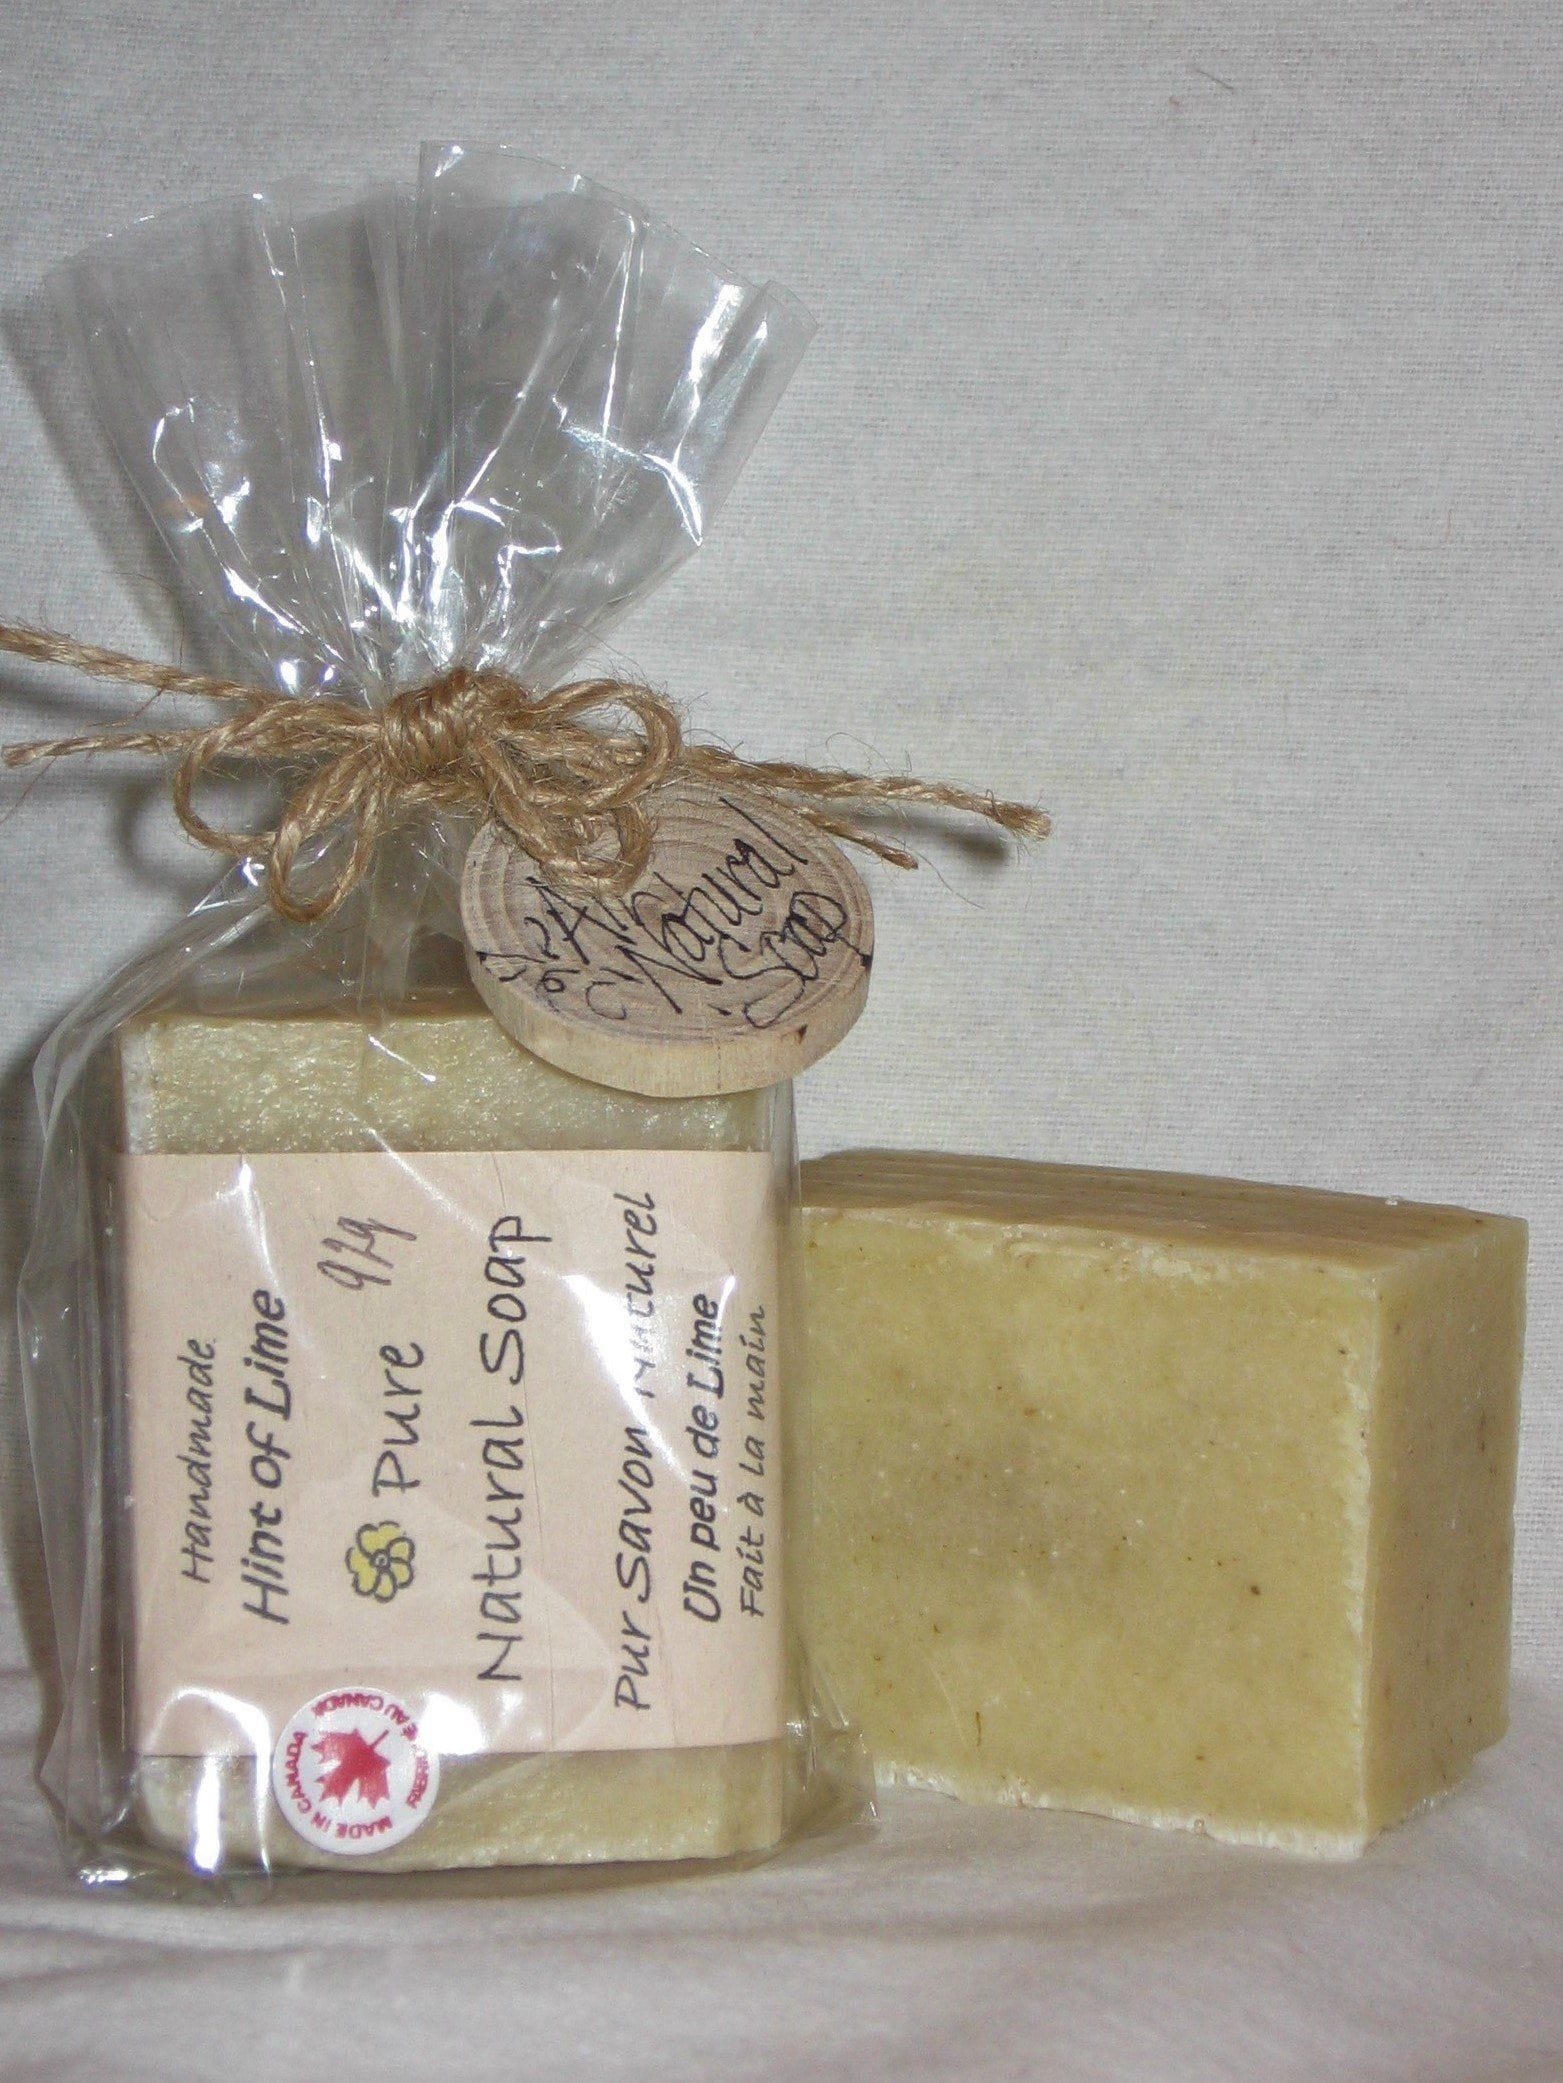 This pure natural soap is a popular choice as an inexpensive handmade natural soap for family every day use.  An appealing light citrus all natural scent. Vegan